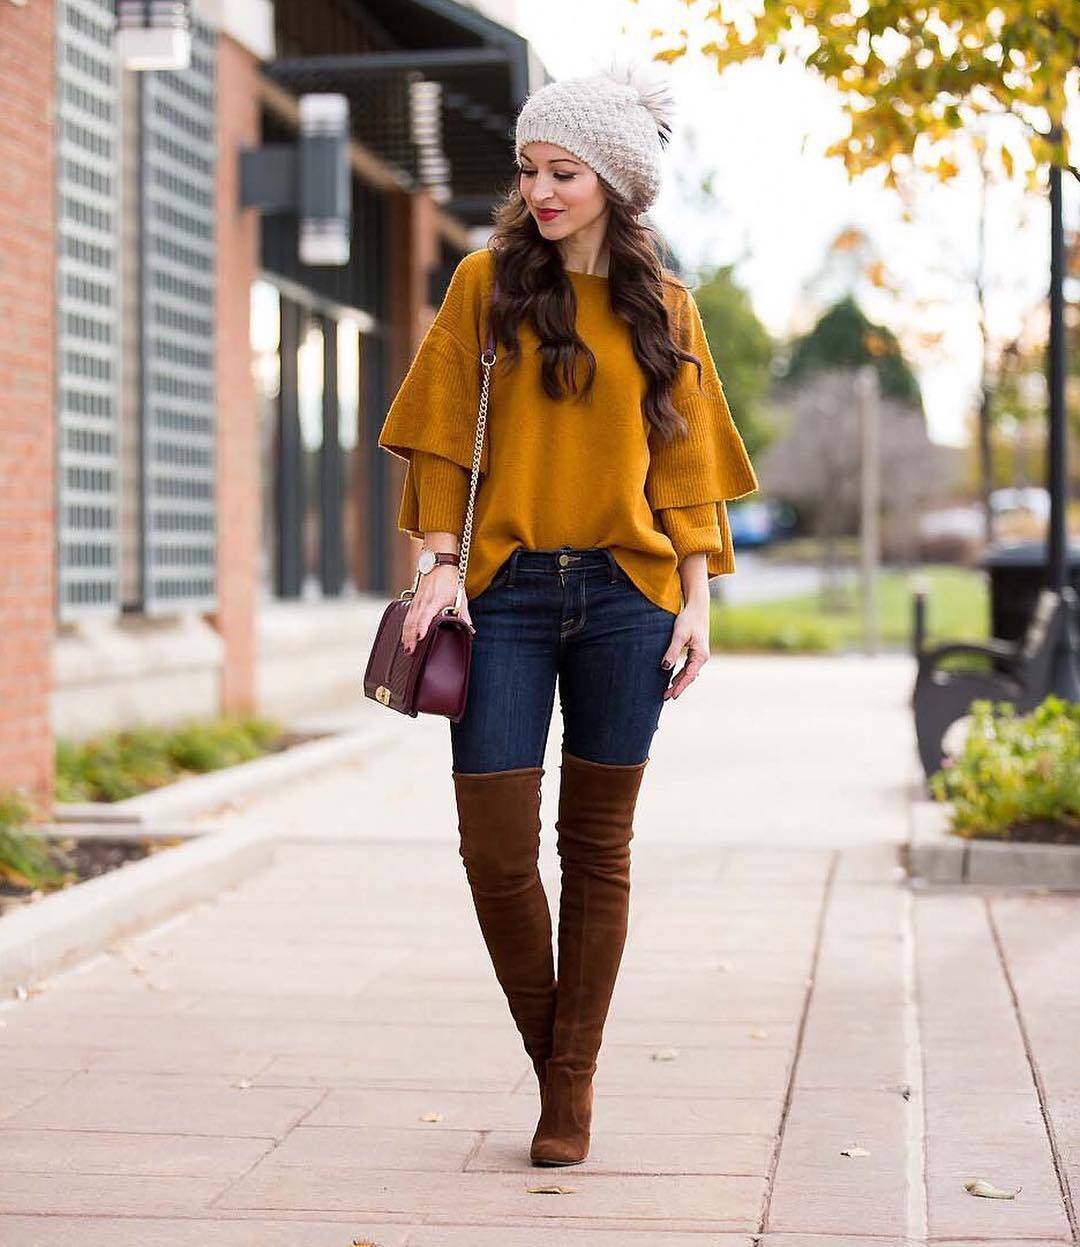 Gray cardigan mustard top outfits